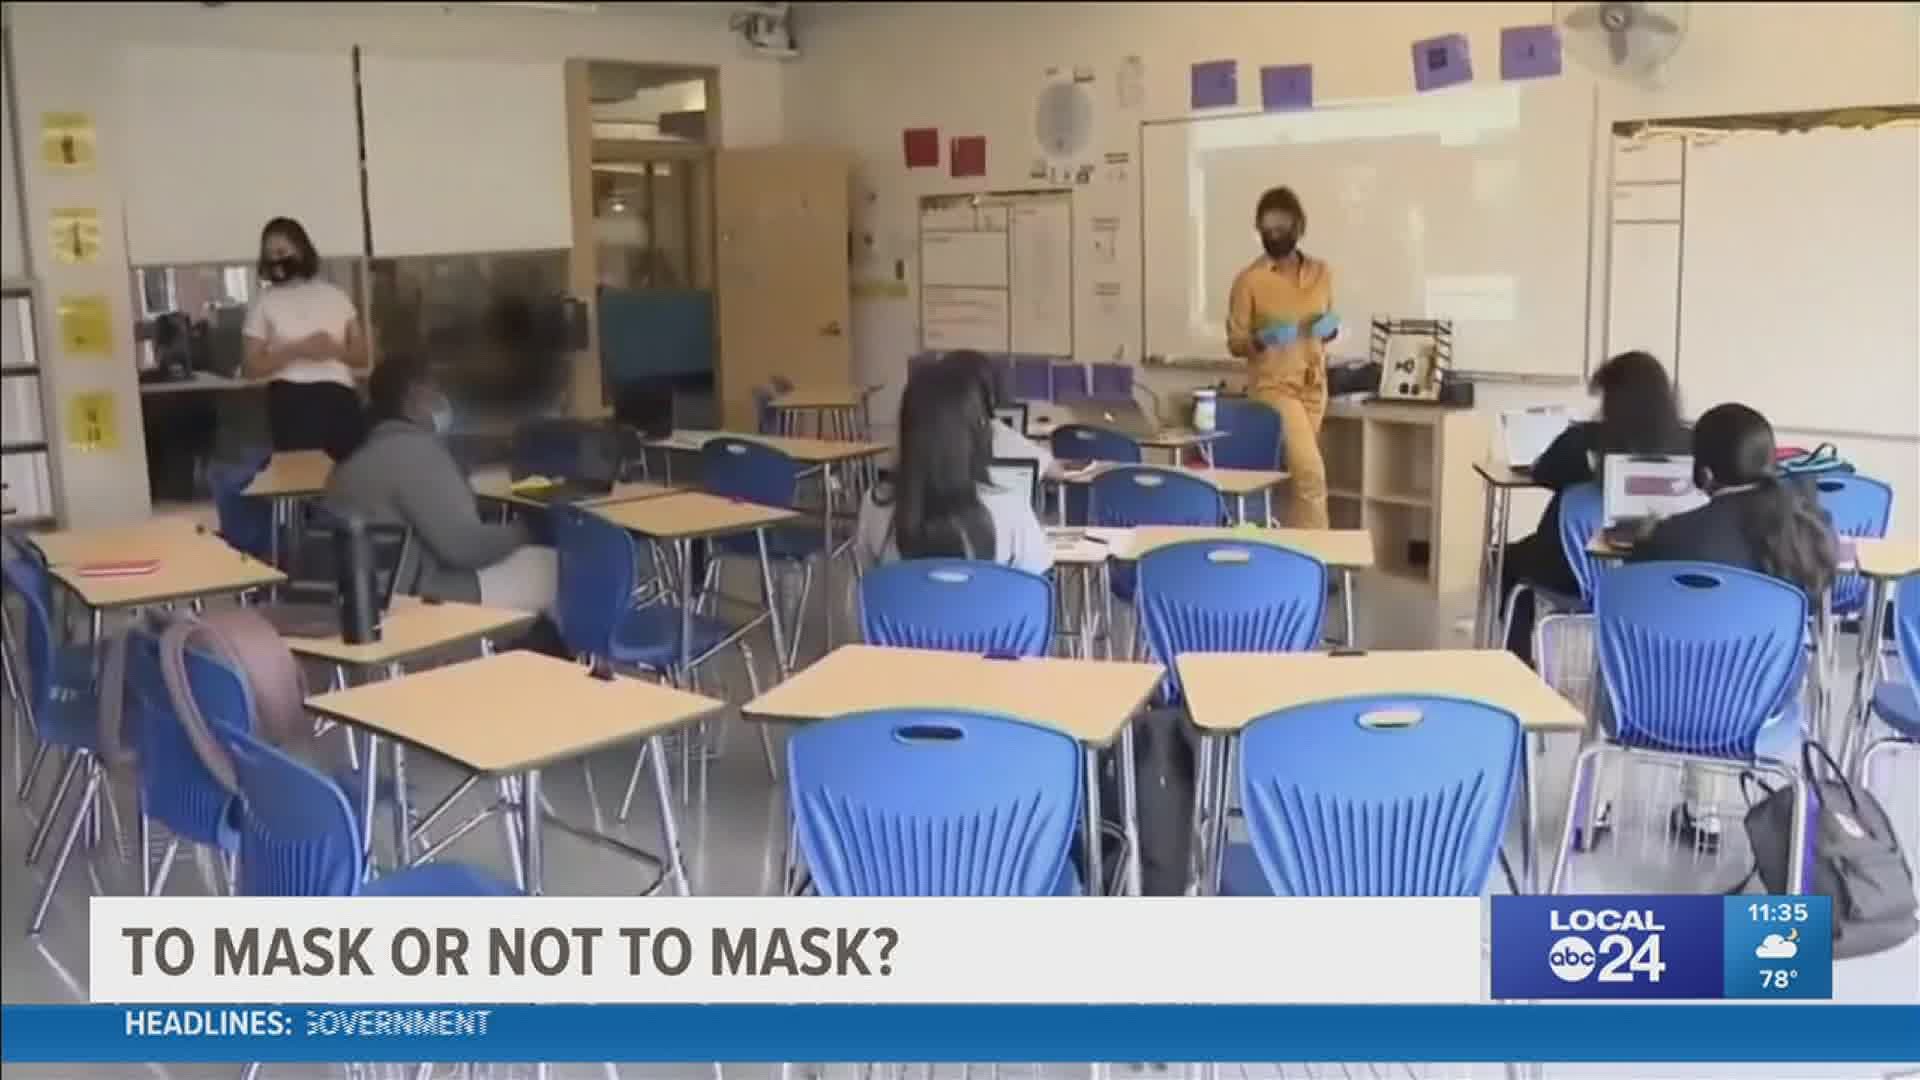 Doctors and scientists say masks are essential, especially at school and especially in areas like the Mid-South where vaccination rates are low.